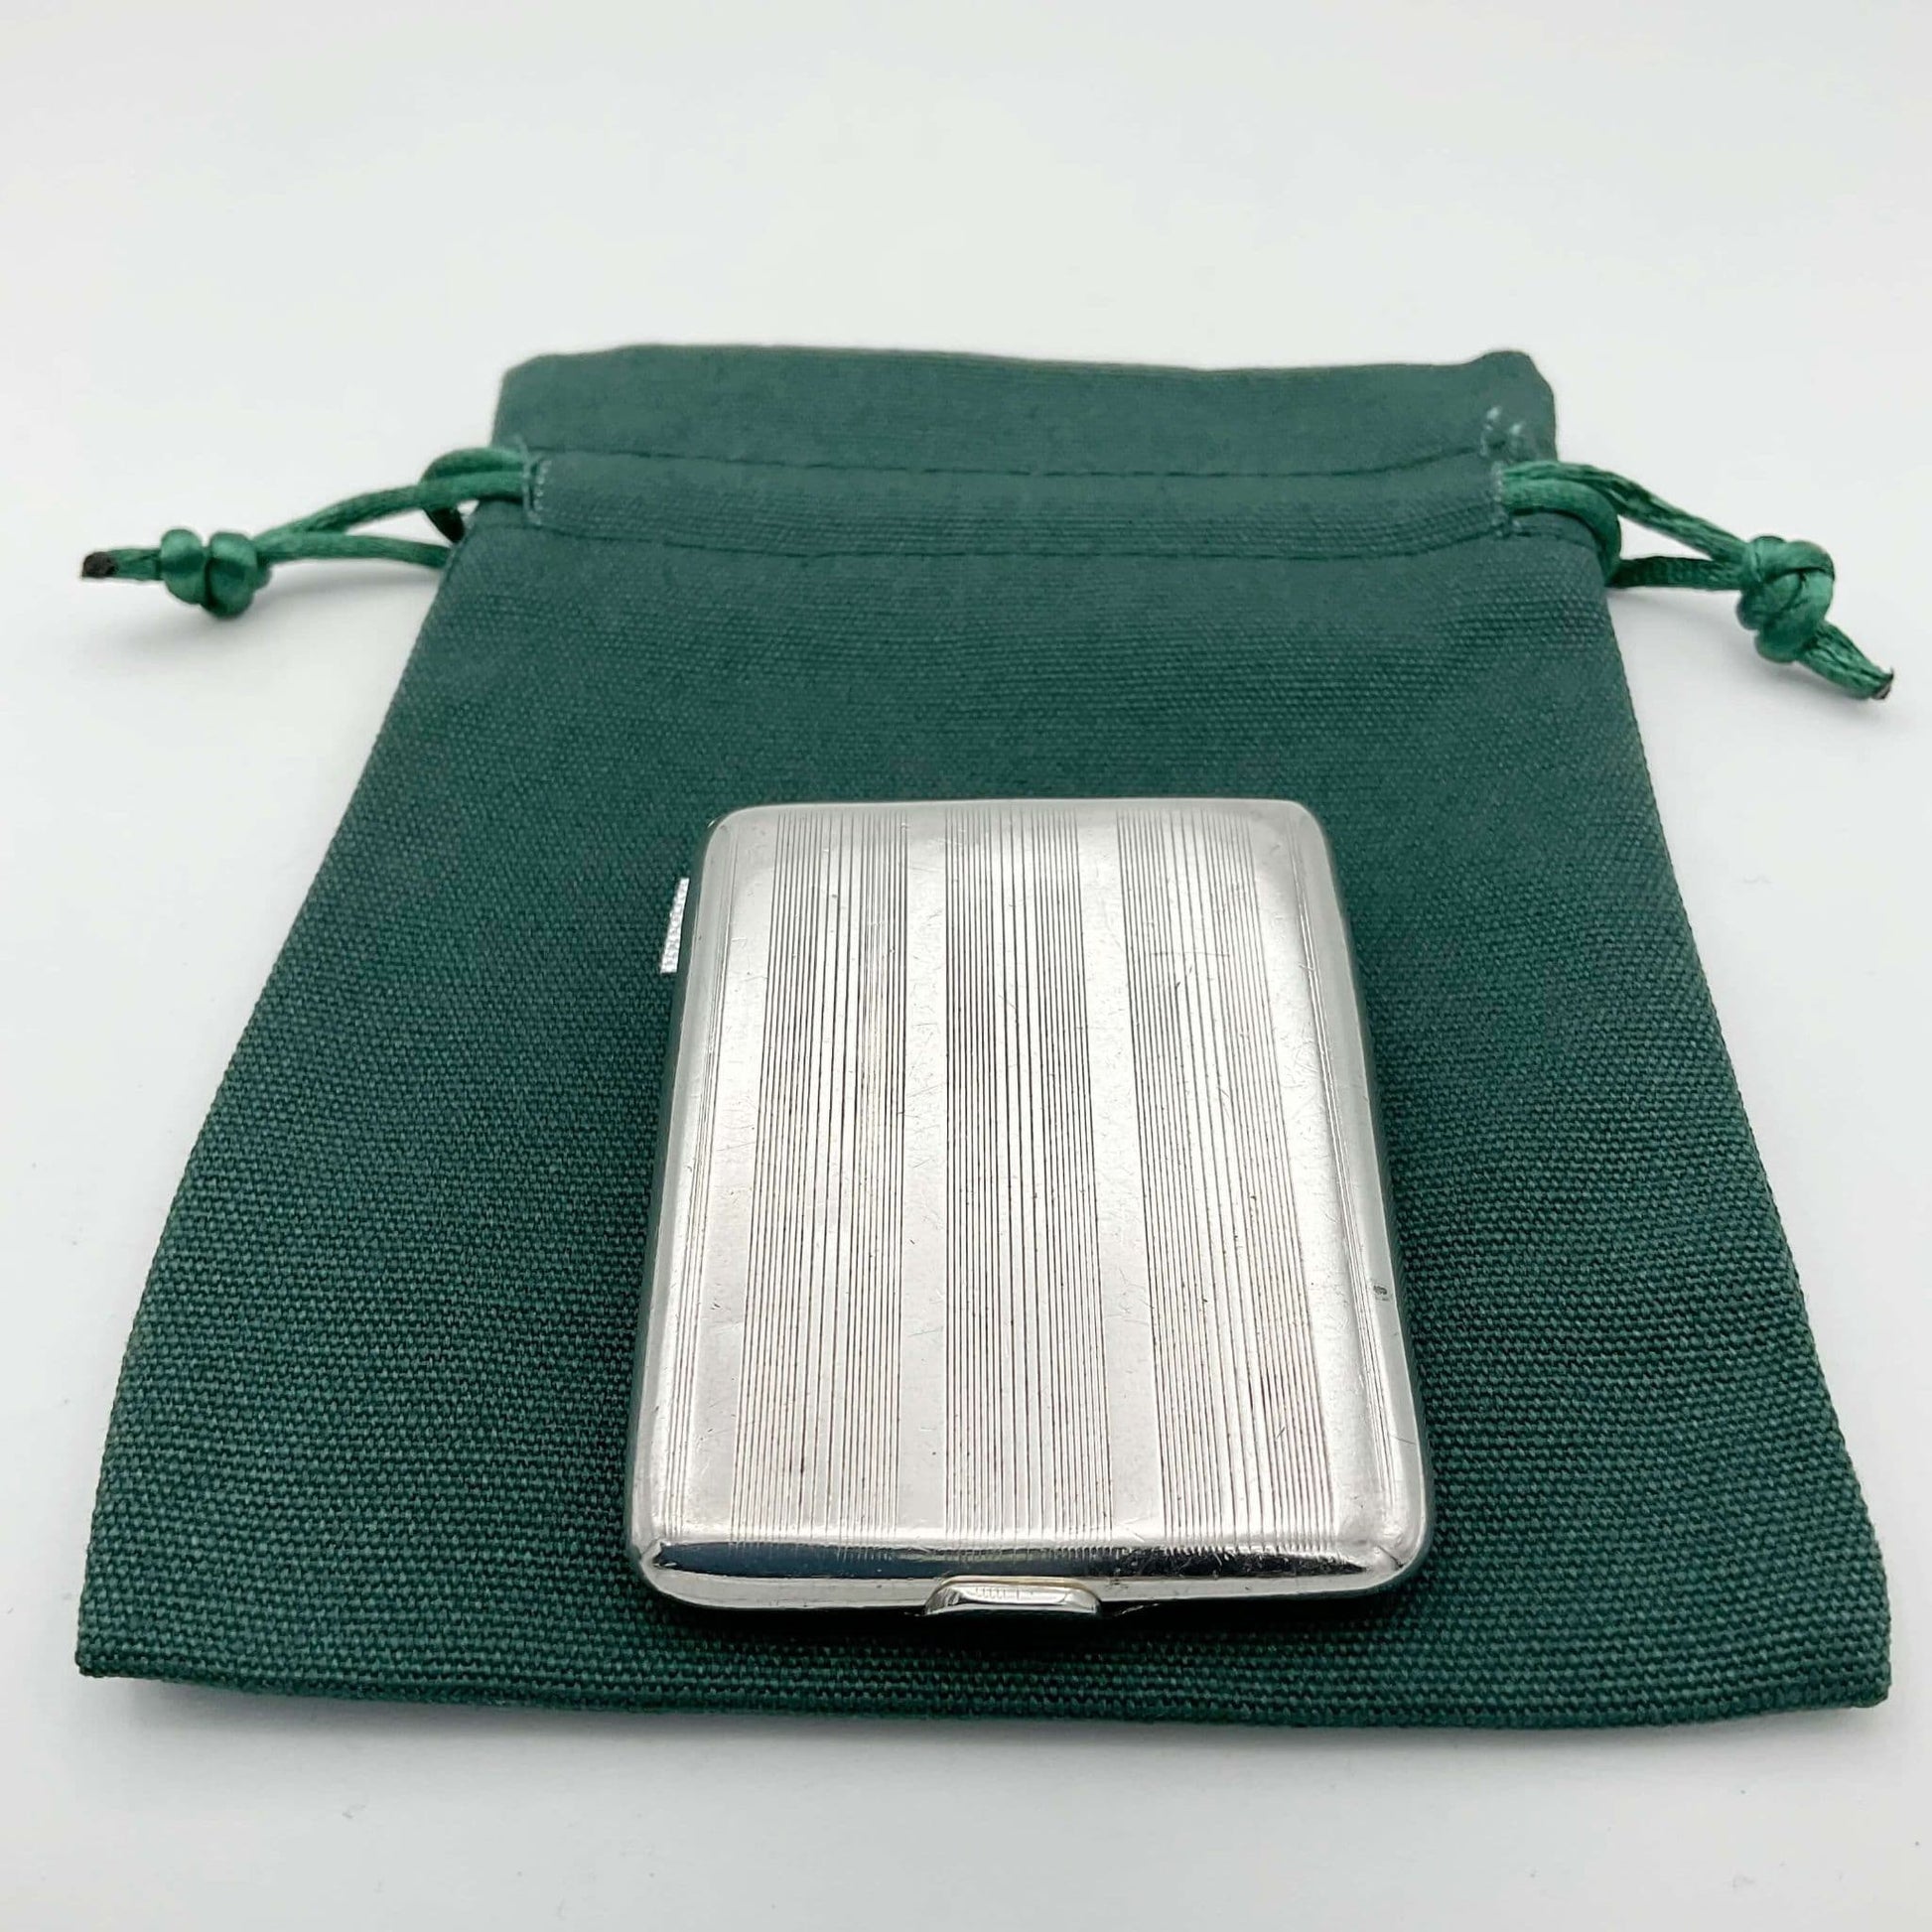 Back view of Silver matchbook case with a lined pattern on a green cotton bag.